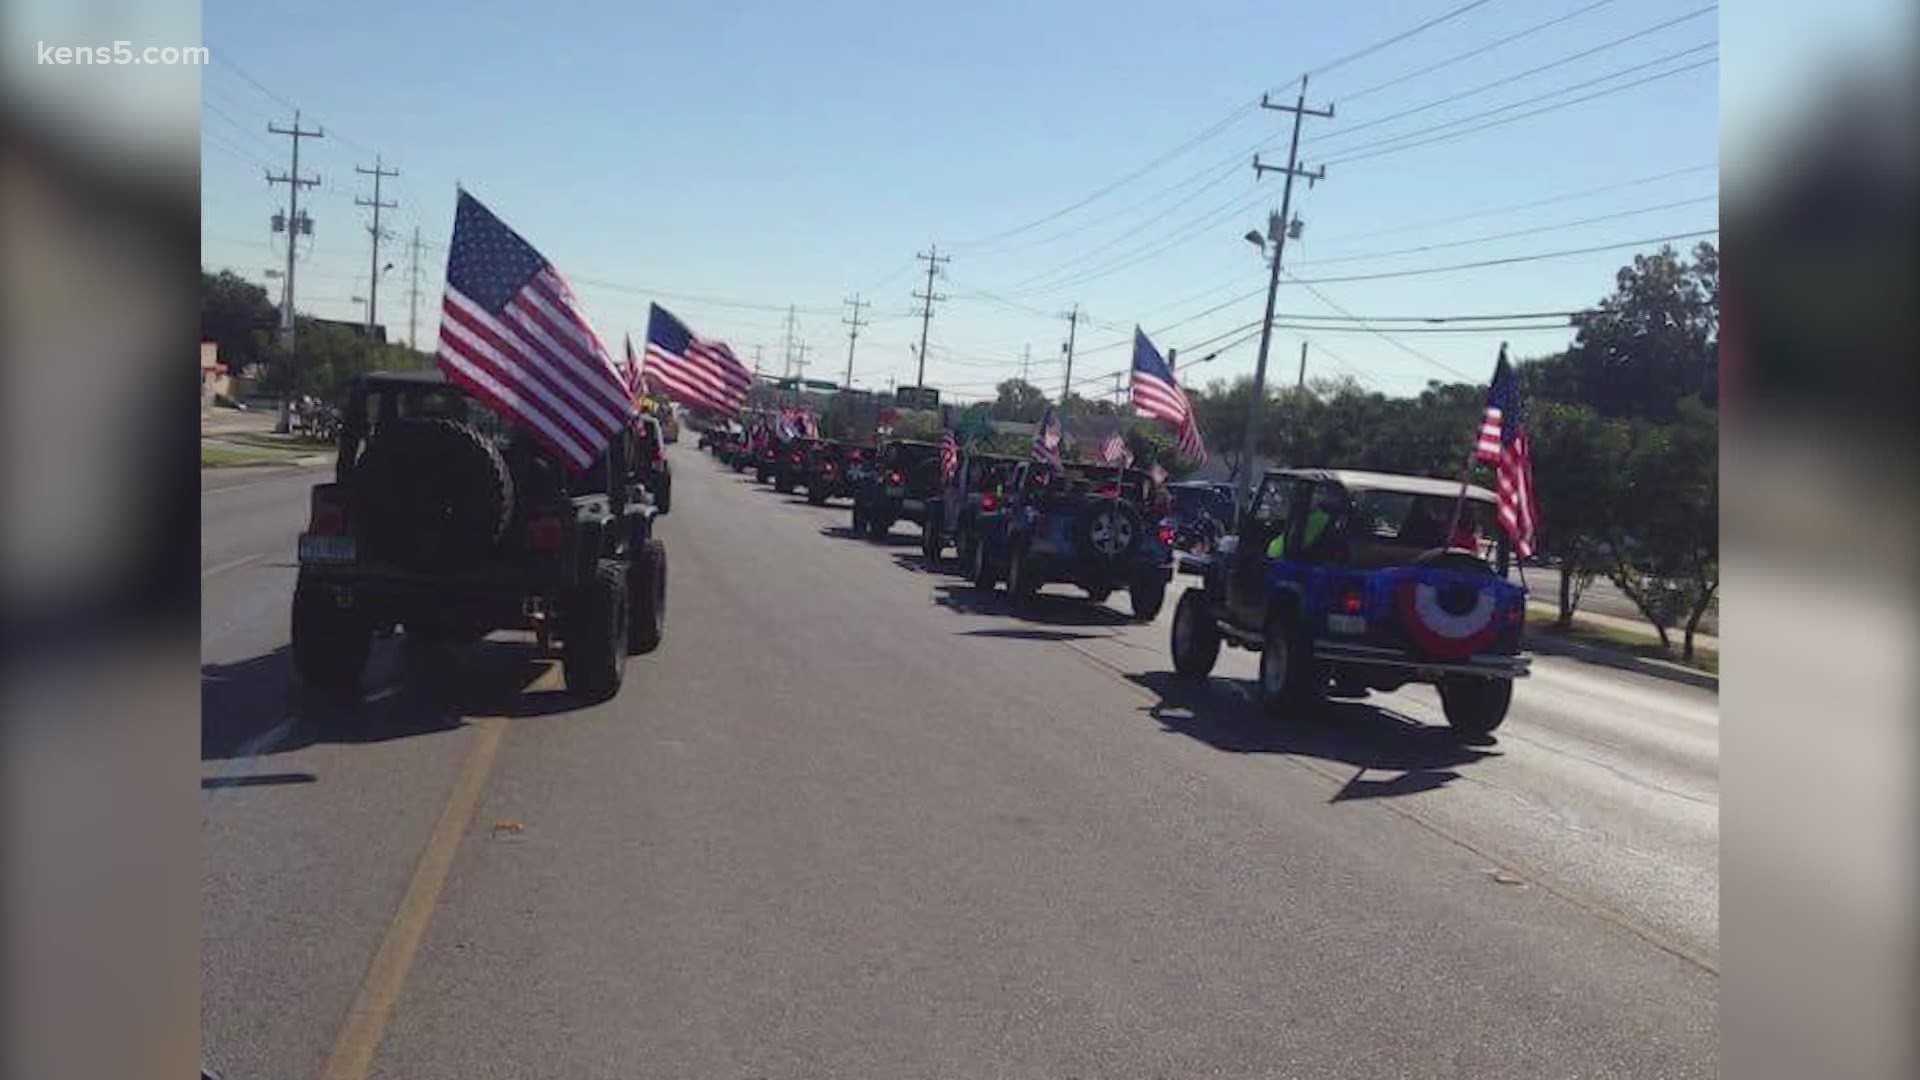 Parades and fireworks are canceled due to the spread of coronavirus. But in New Braunfels, a group of Jeep owners found a way to celebrate while staying safe.